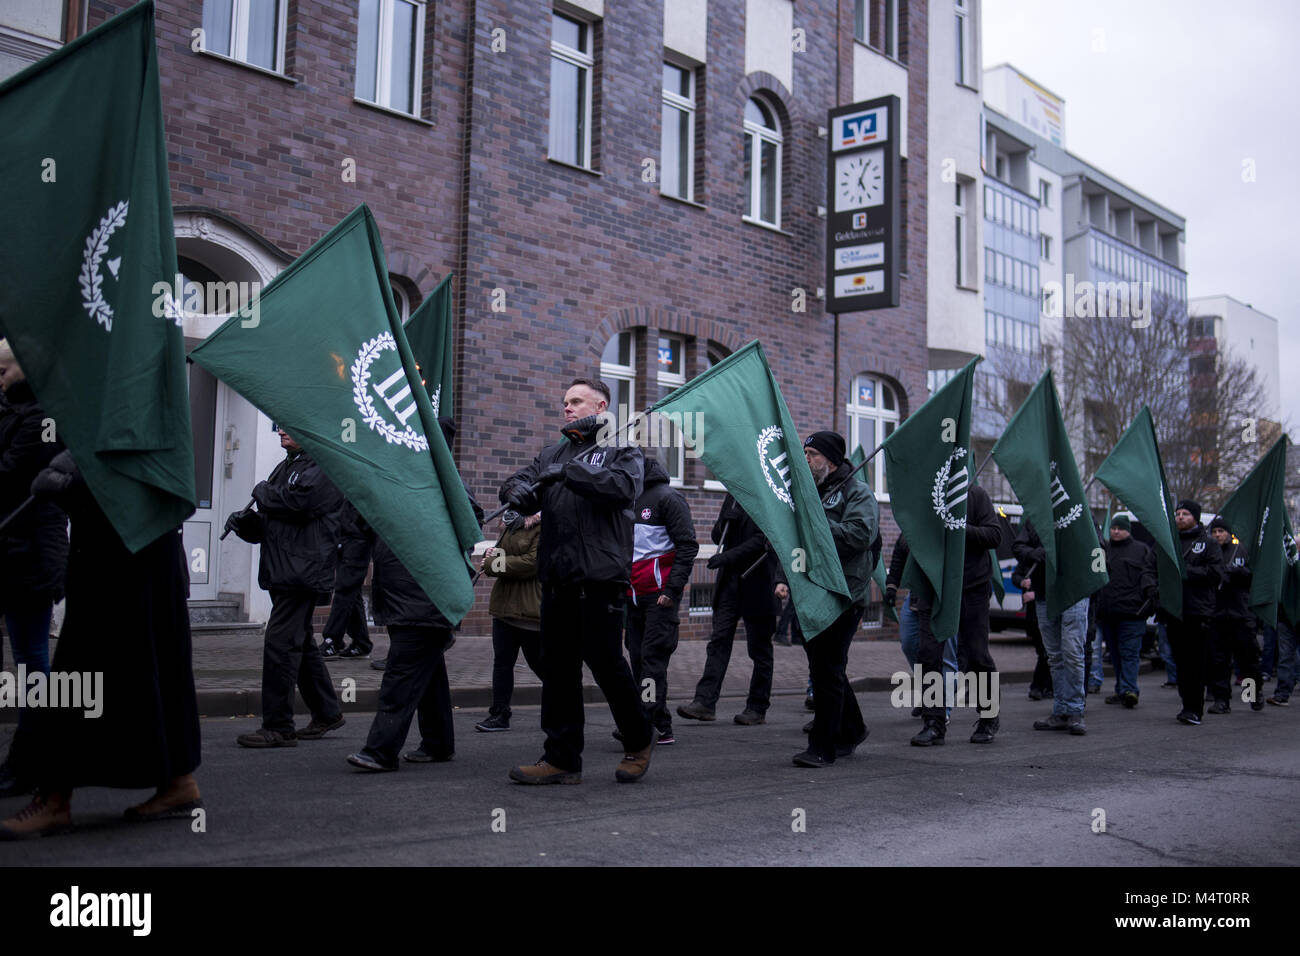 February 17, 2018 - Nordhausen, ThÃ¼ringen, Germany - Torch march of the neo-Nazi party ''The Third Way'' to commemorate the bombed German cities in World War II Credit: Jannis Grosse/ZUMA Wire/Alamy Live News Stock Photo